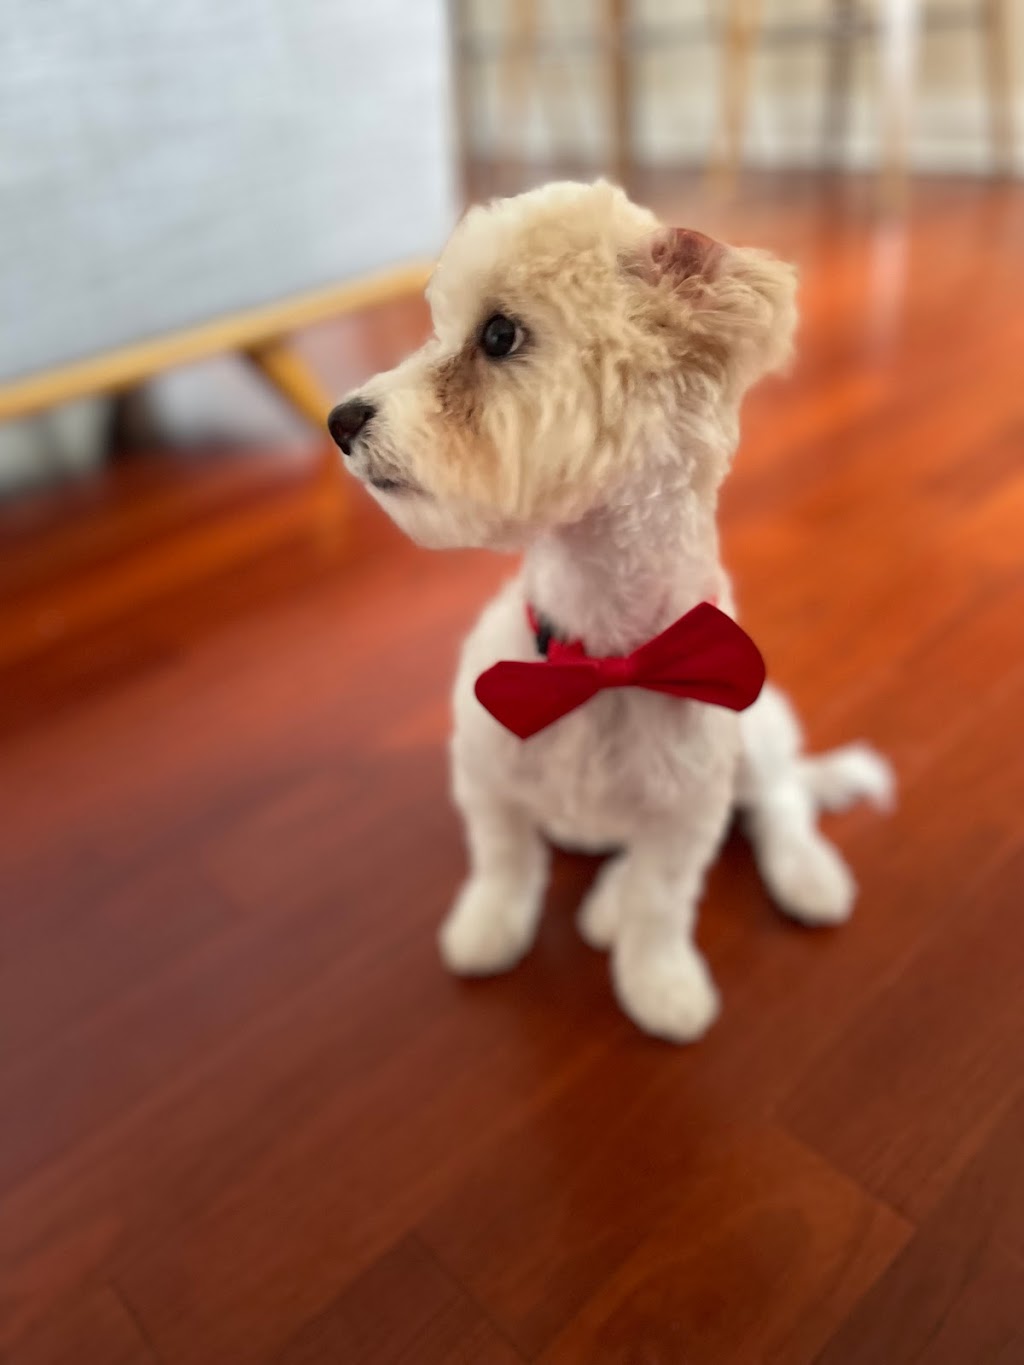 Rapawzel Dog Grooming & Day Care | 2589 Francis Lewis Blvd, Queens, NY 11358, USA | Phone: (718) 271-1229